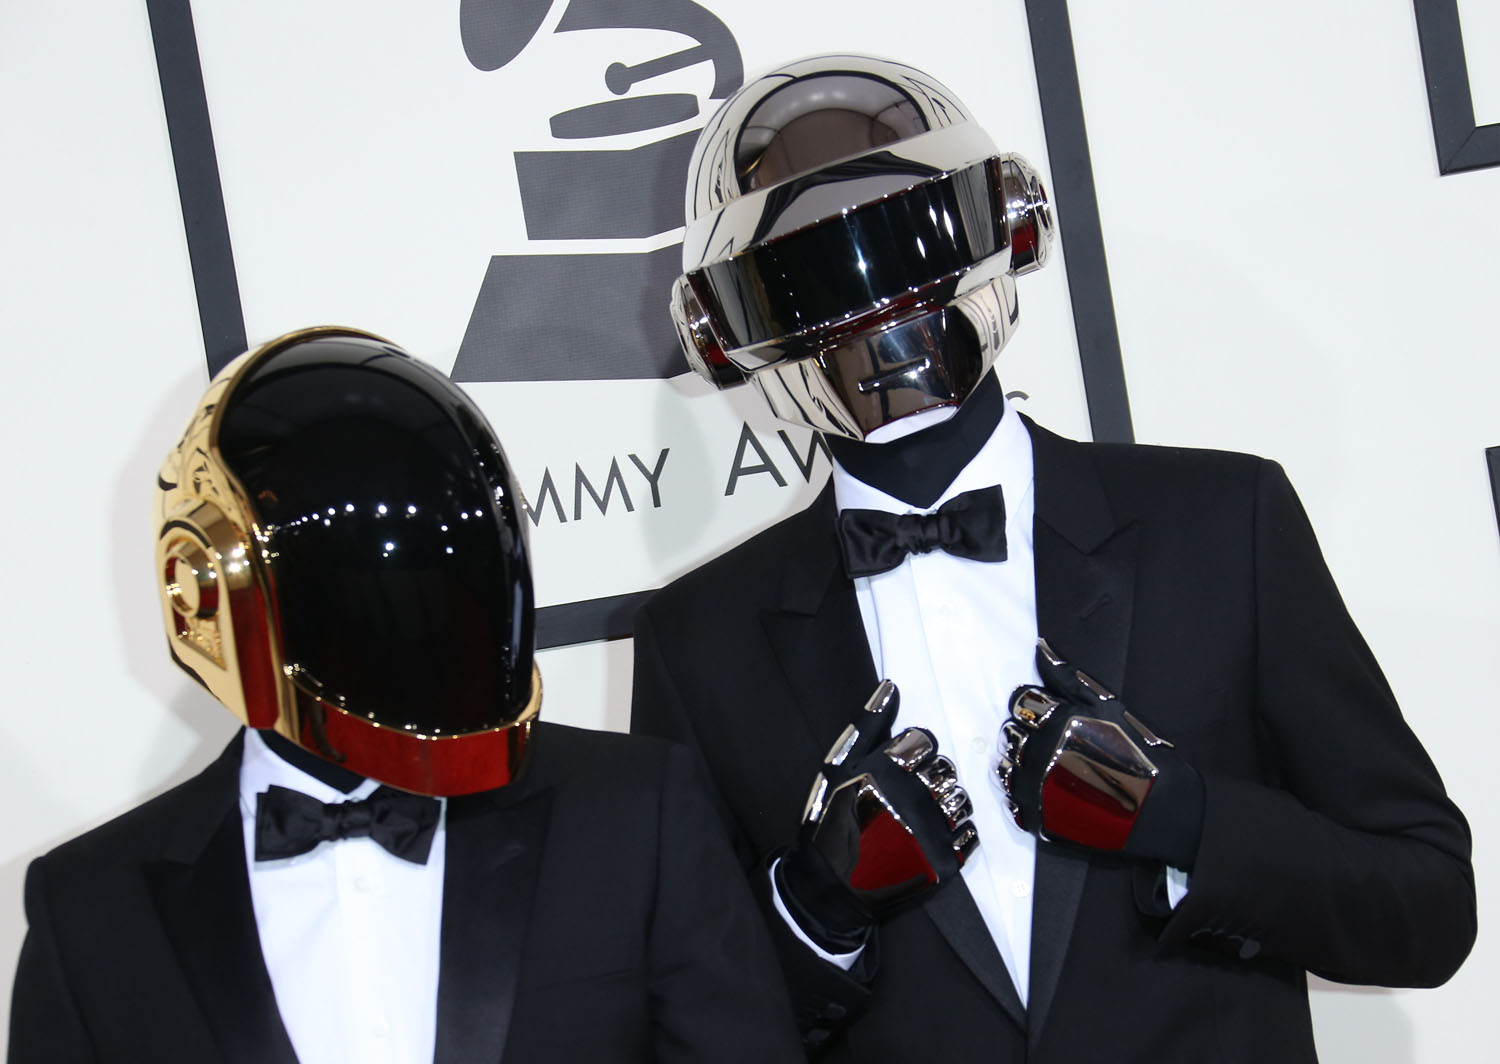 Thomas Bangalter and Guy-Manuel de Homem-Christo of 'Daft Punk' arrive at the 56th Annual GRAMMY Awards at Staples Center on January 26, 2014 in Los Angeles, California. (Dan MacMedan&mdash;WireImage)